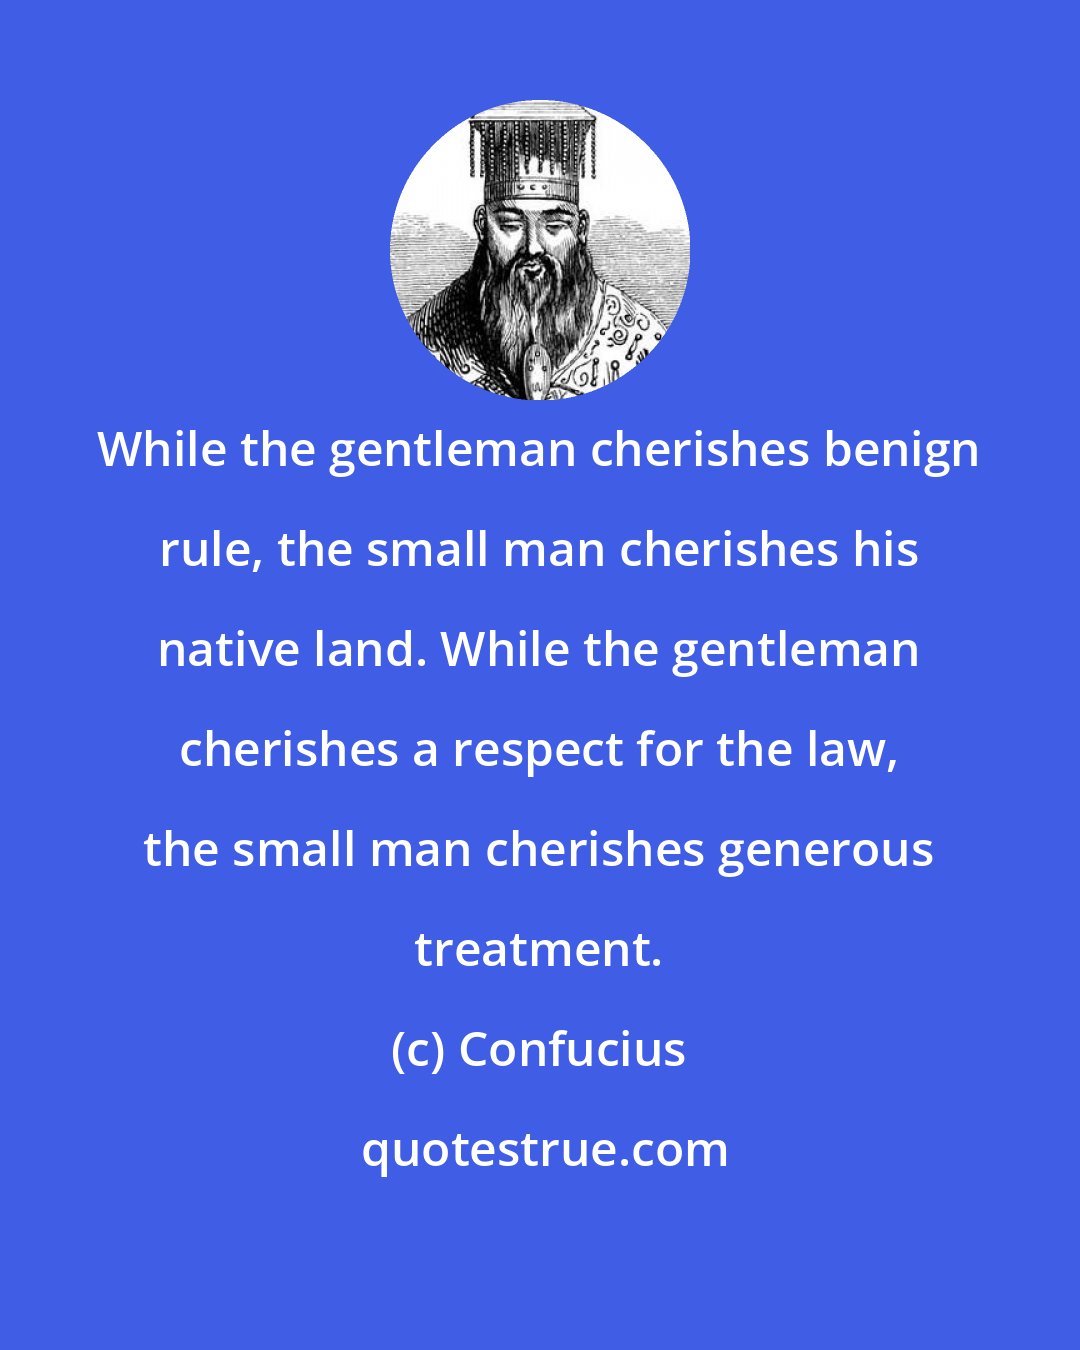 Confucius: While the gentleman cherishes benign rule, the small man cherishes his native land. While the gentleman cherishes a respect for the law, the small man cherishes generous treatment.